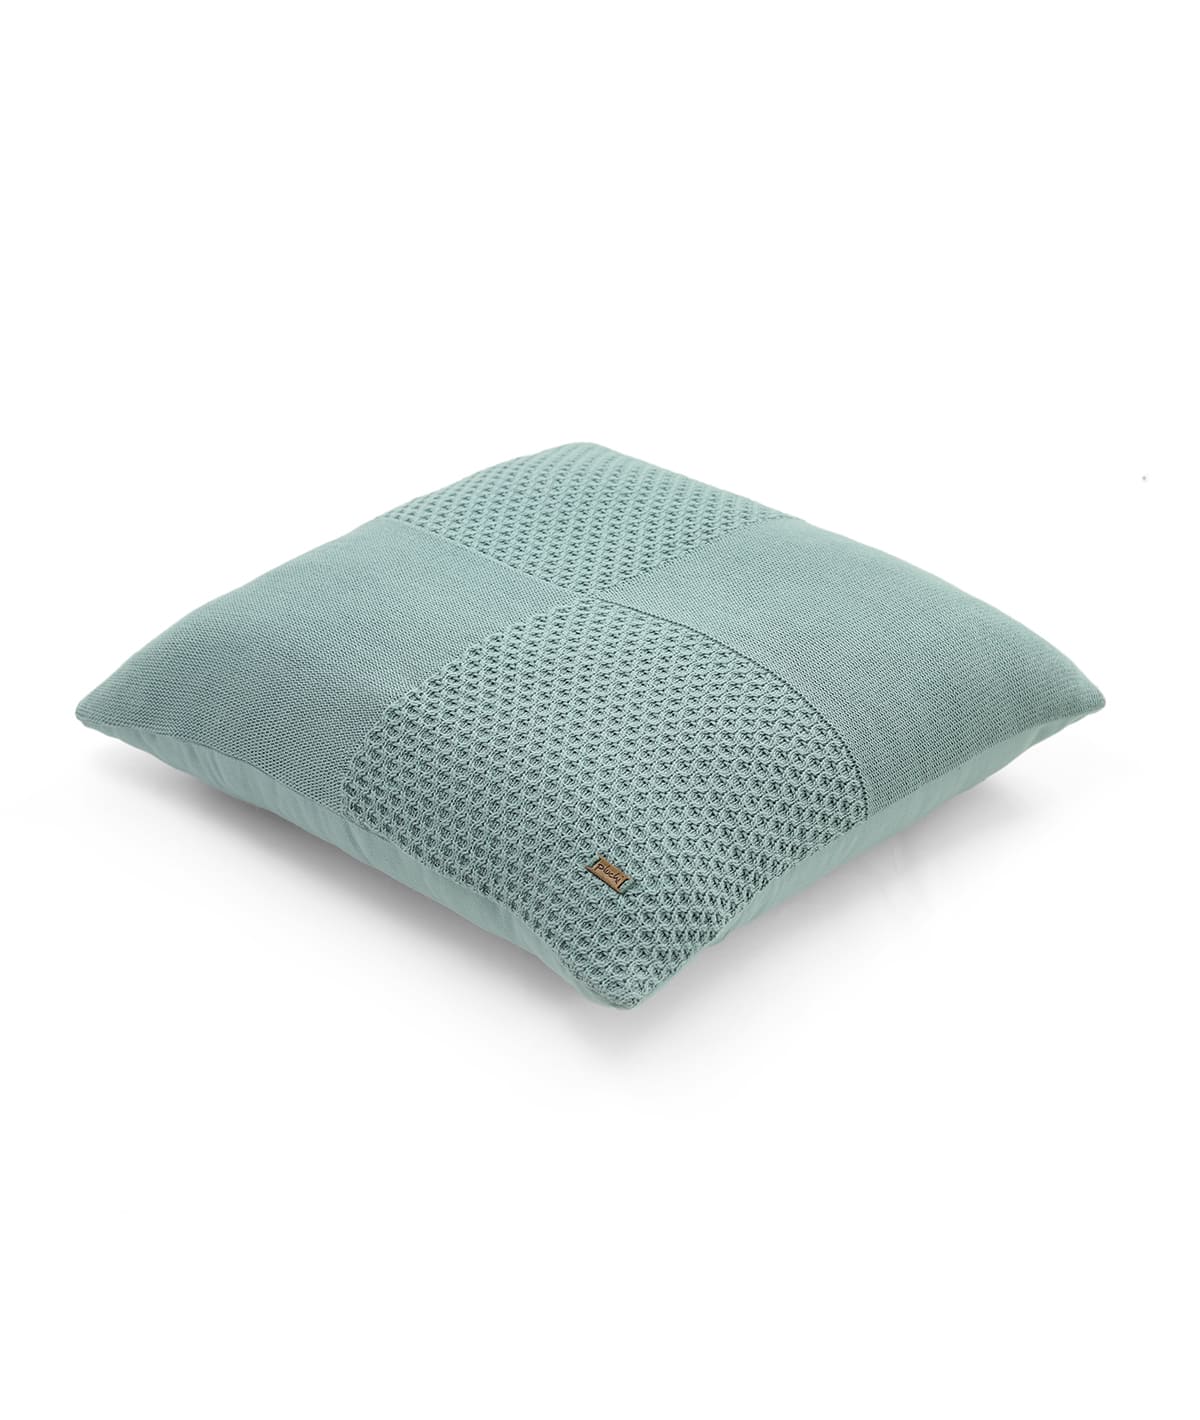 buy online Cushion covers